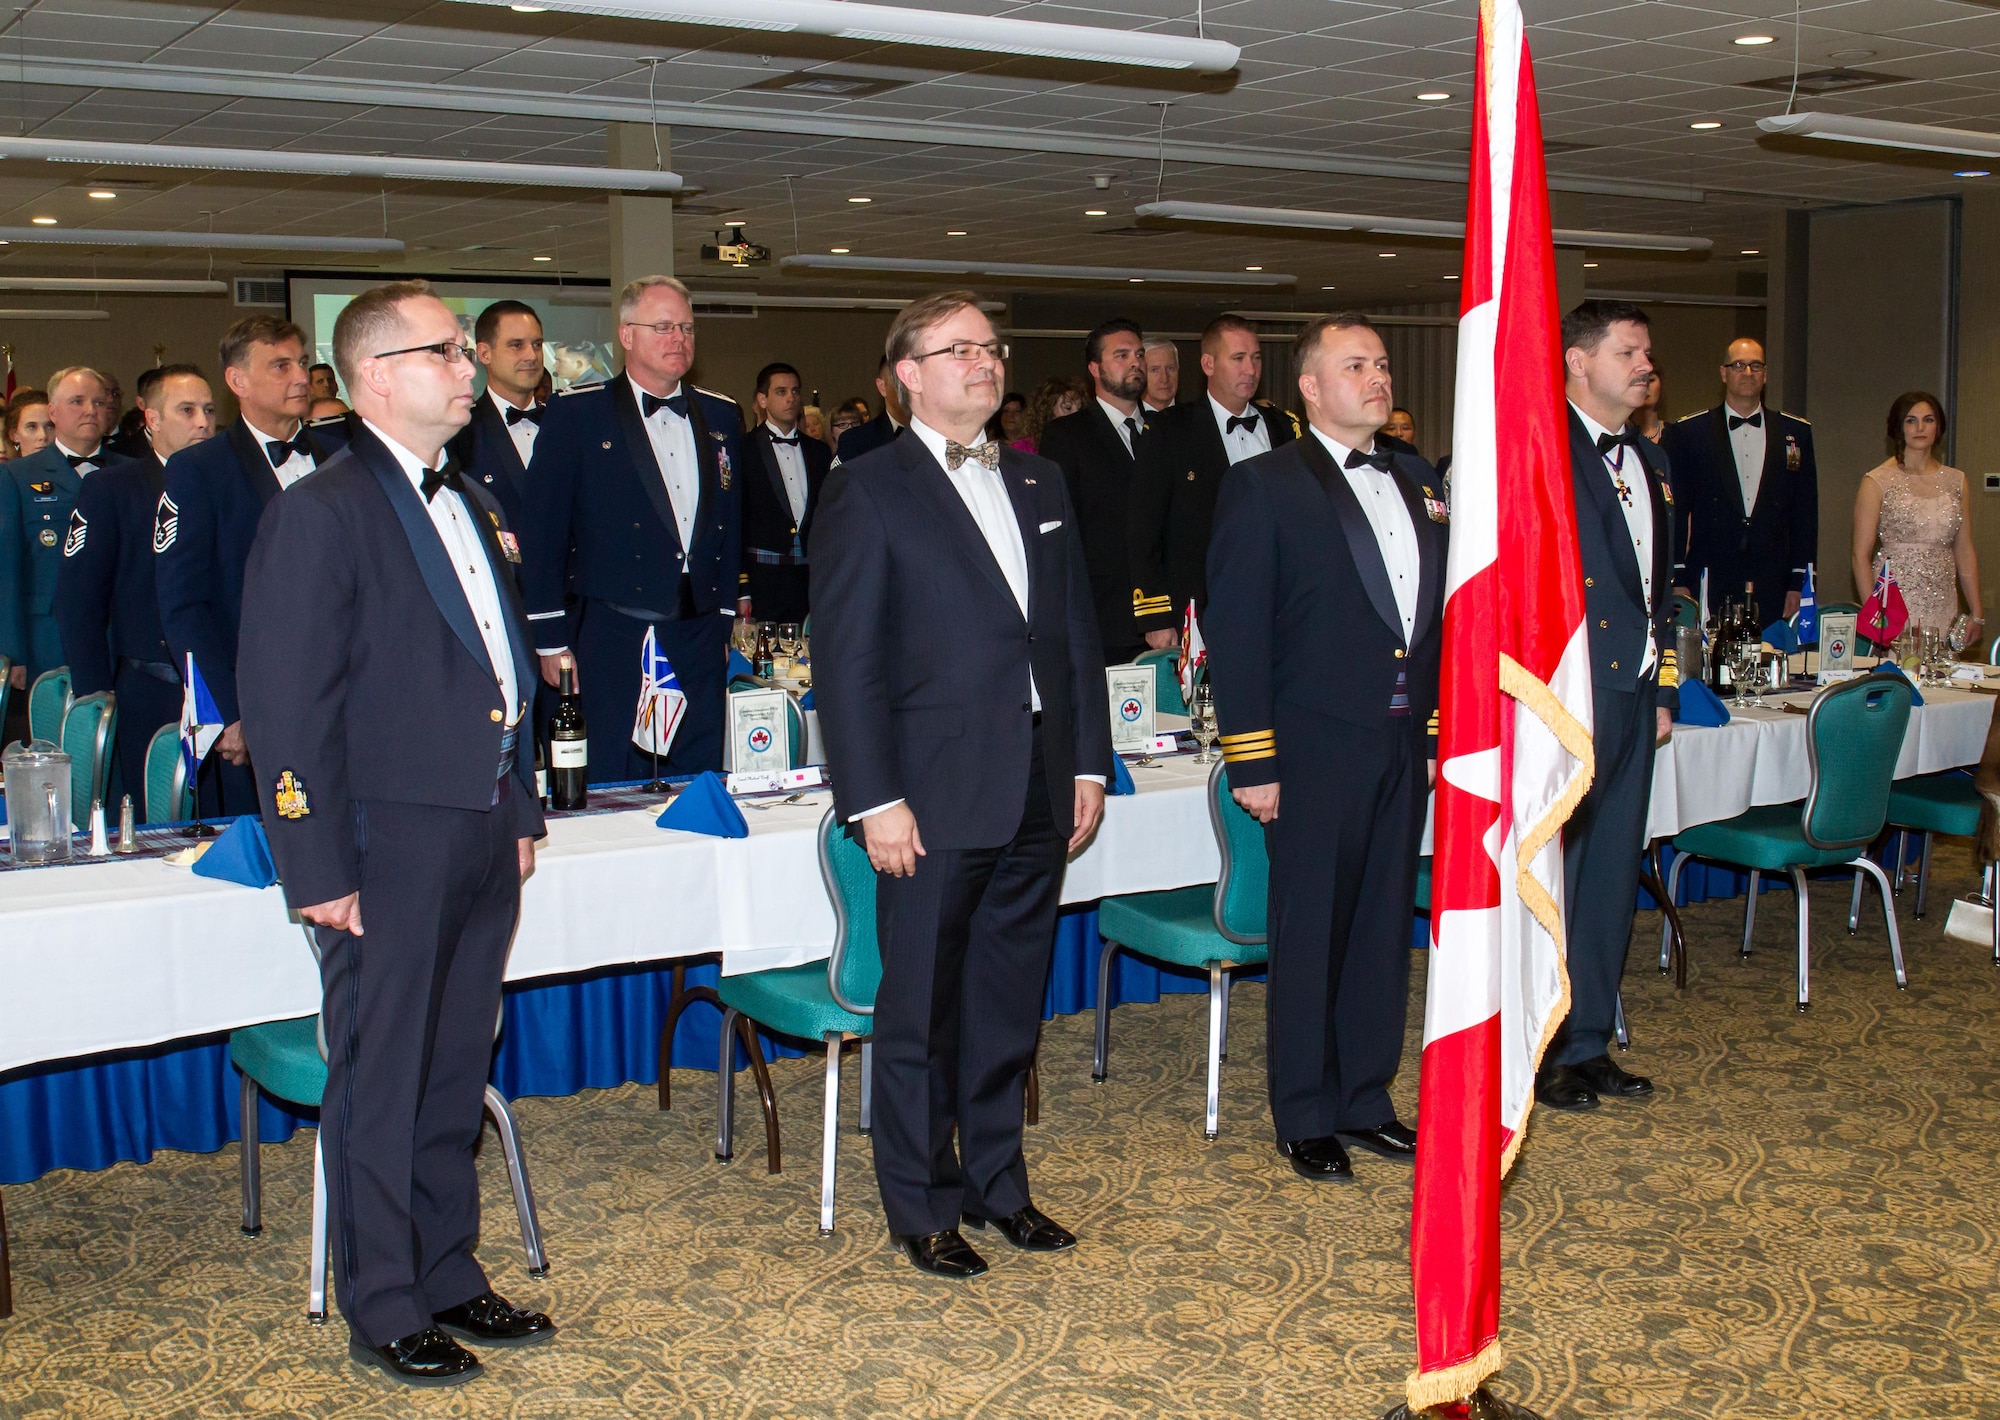 Members of the head table stand for the playing of the Canadian national anthem during the 92nd Anniversary of the Royal Canadian Air Force (RCAF) Mess dinner hosted by the Western Air Defense Sector Canadian Detachment April 15 at the American Lake Conference Center, Joint Base Lewis-McChord.  Pictured from left to right: Canadian Air Force Chief Warrant Officer Marc Corriveau; Michael Wooff, consul to the Canadian Consulate; Lt. Col. Matthew Wappler, Canadian Detachment commander; and Lt. Gen. Pierre St. Amand, deputy commander for North American Aerospace Defense Command. (Courtesy photo by Conrad Neumann II)